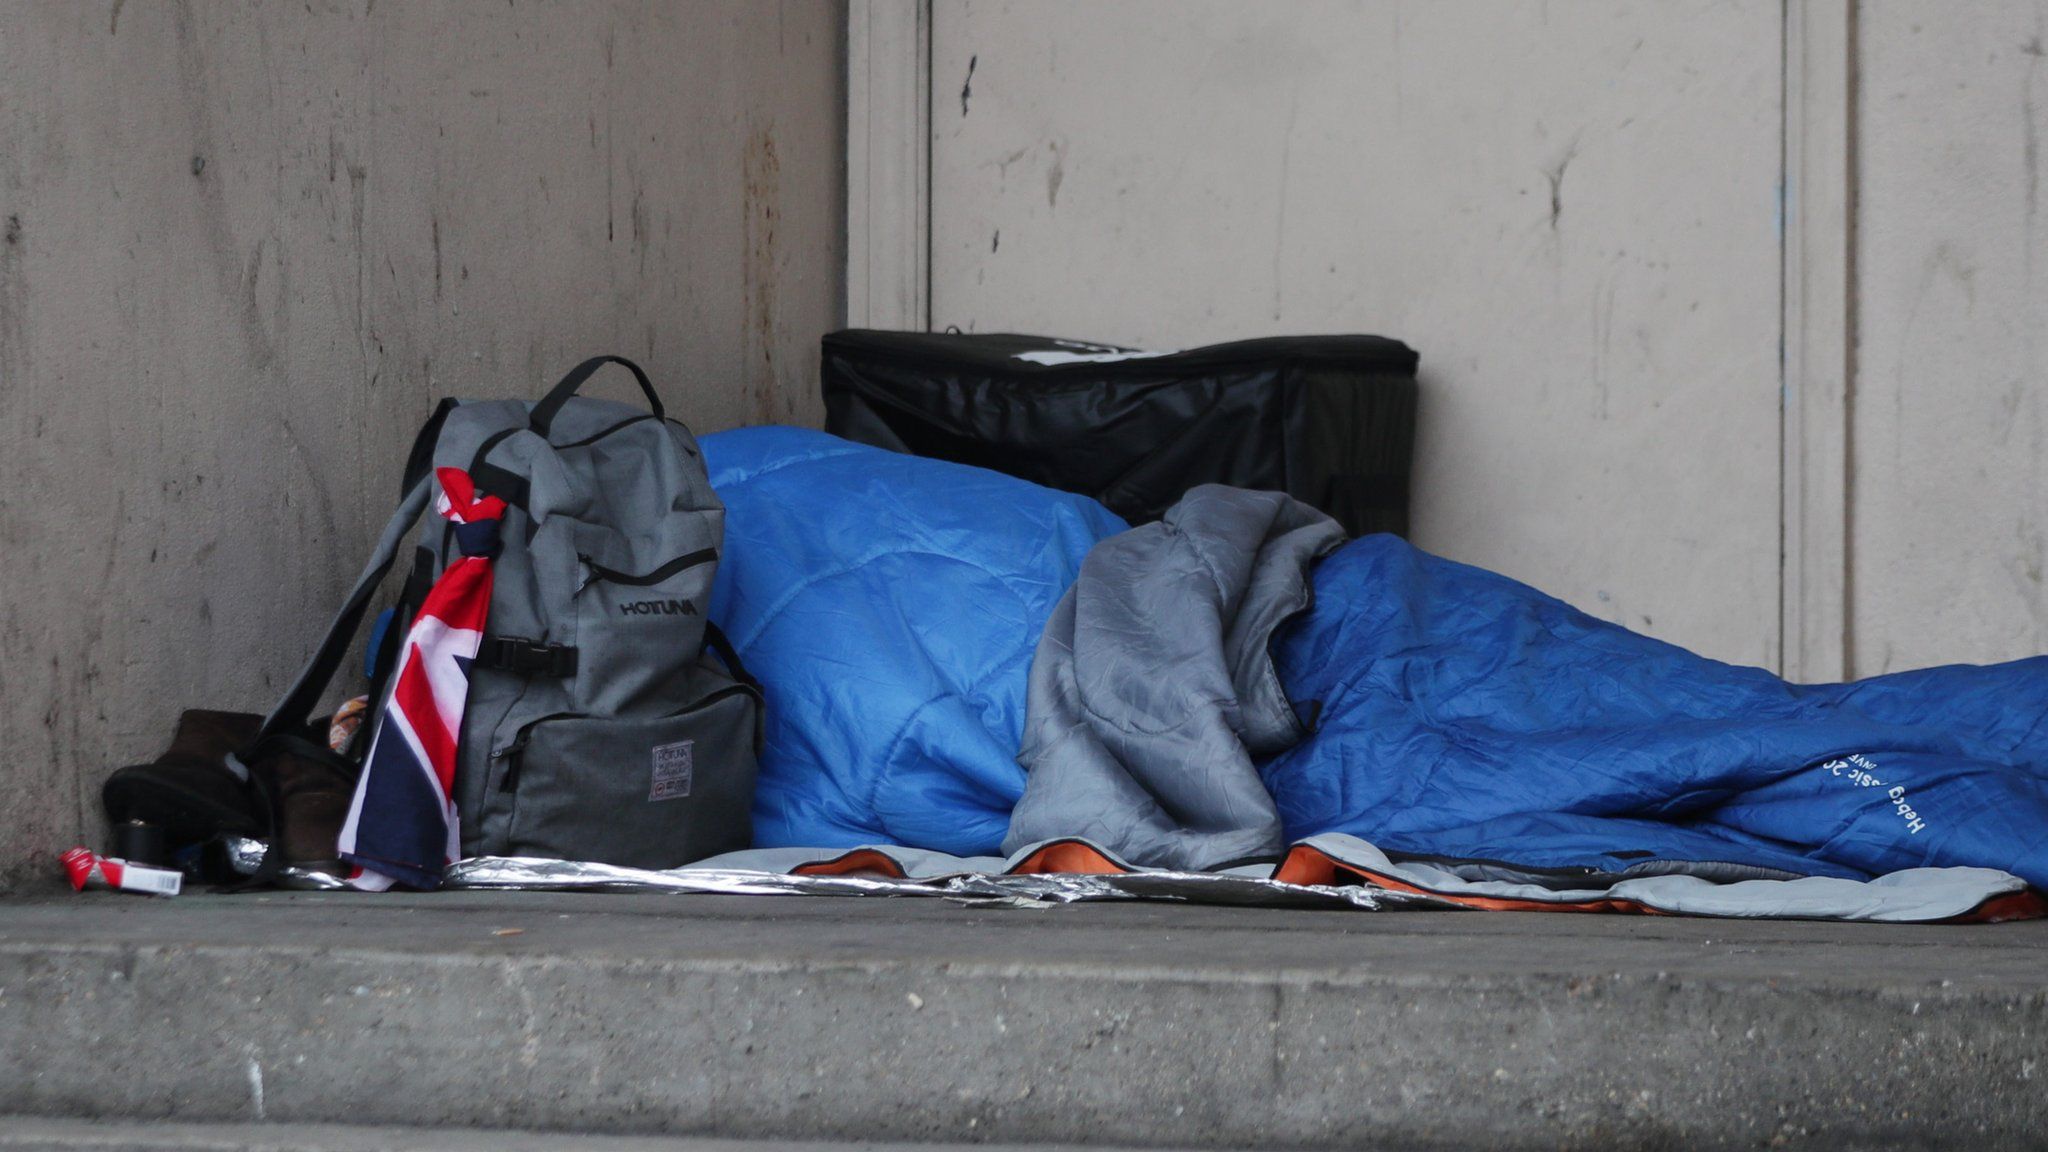 A homeless person in a sleeping bag on the streets in the UK